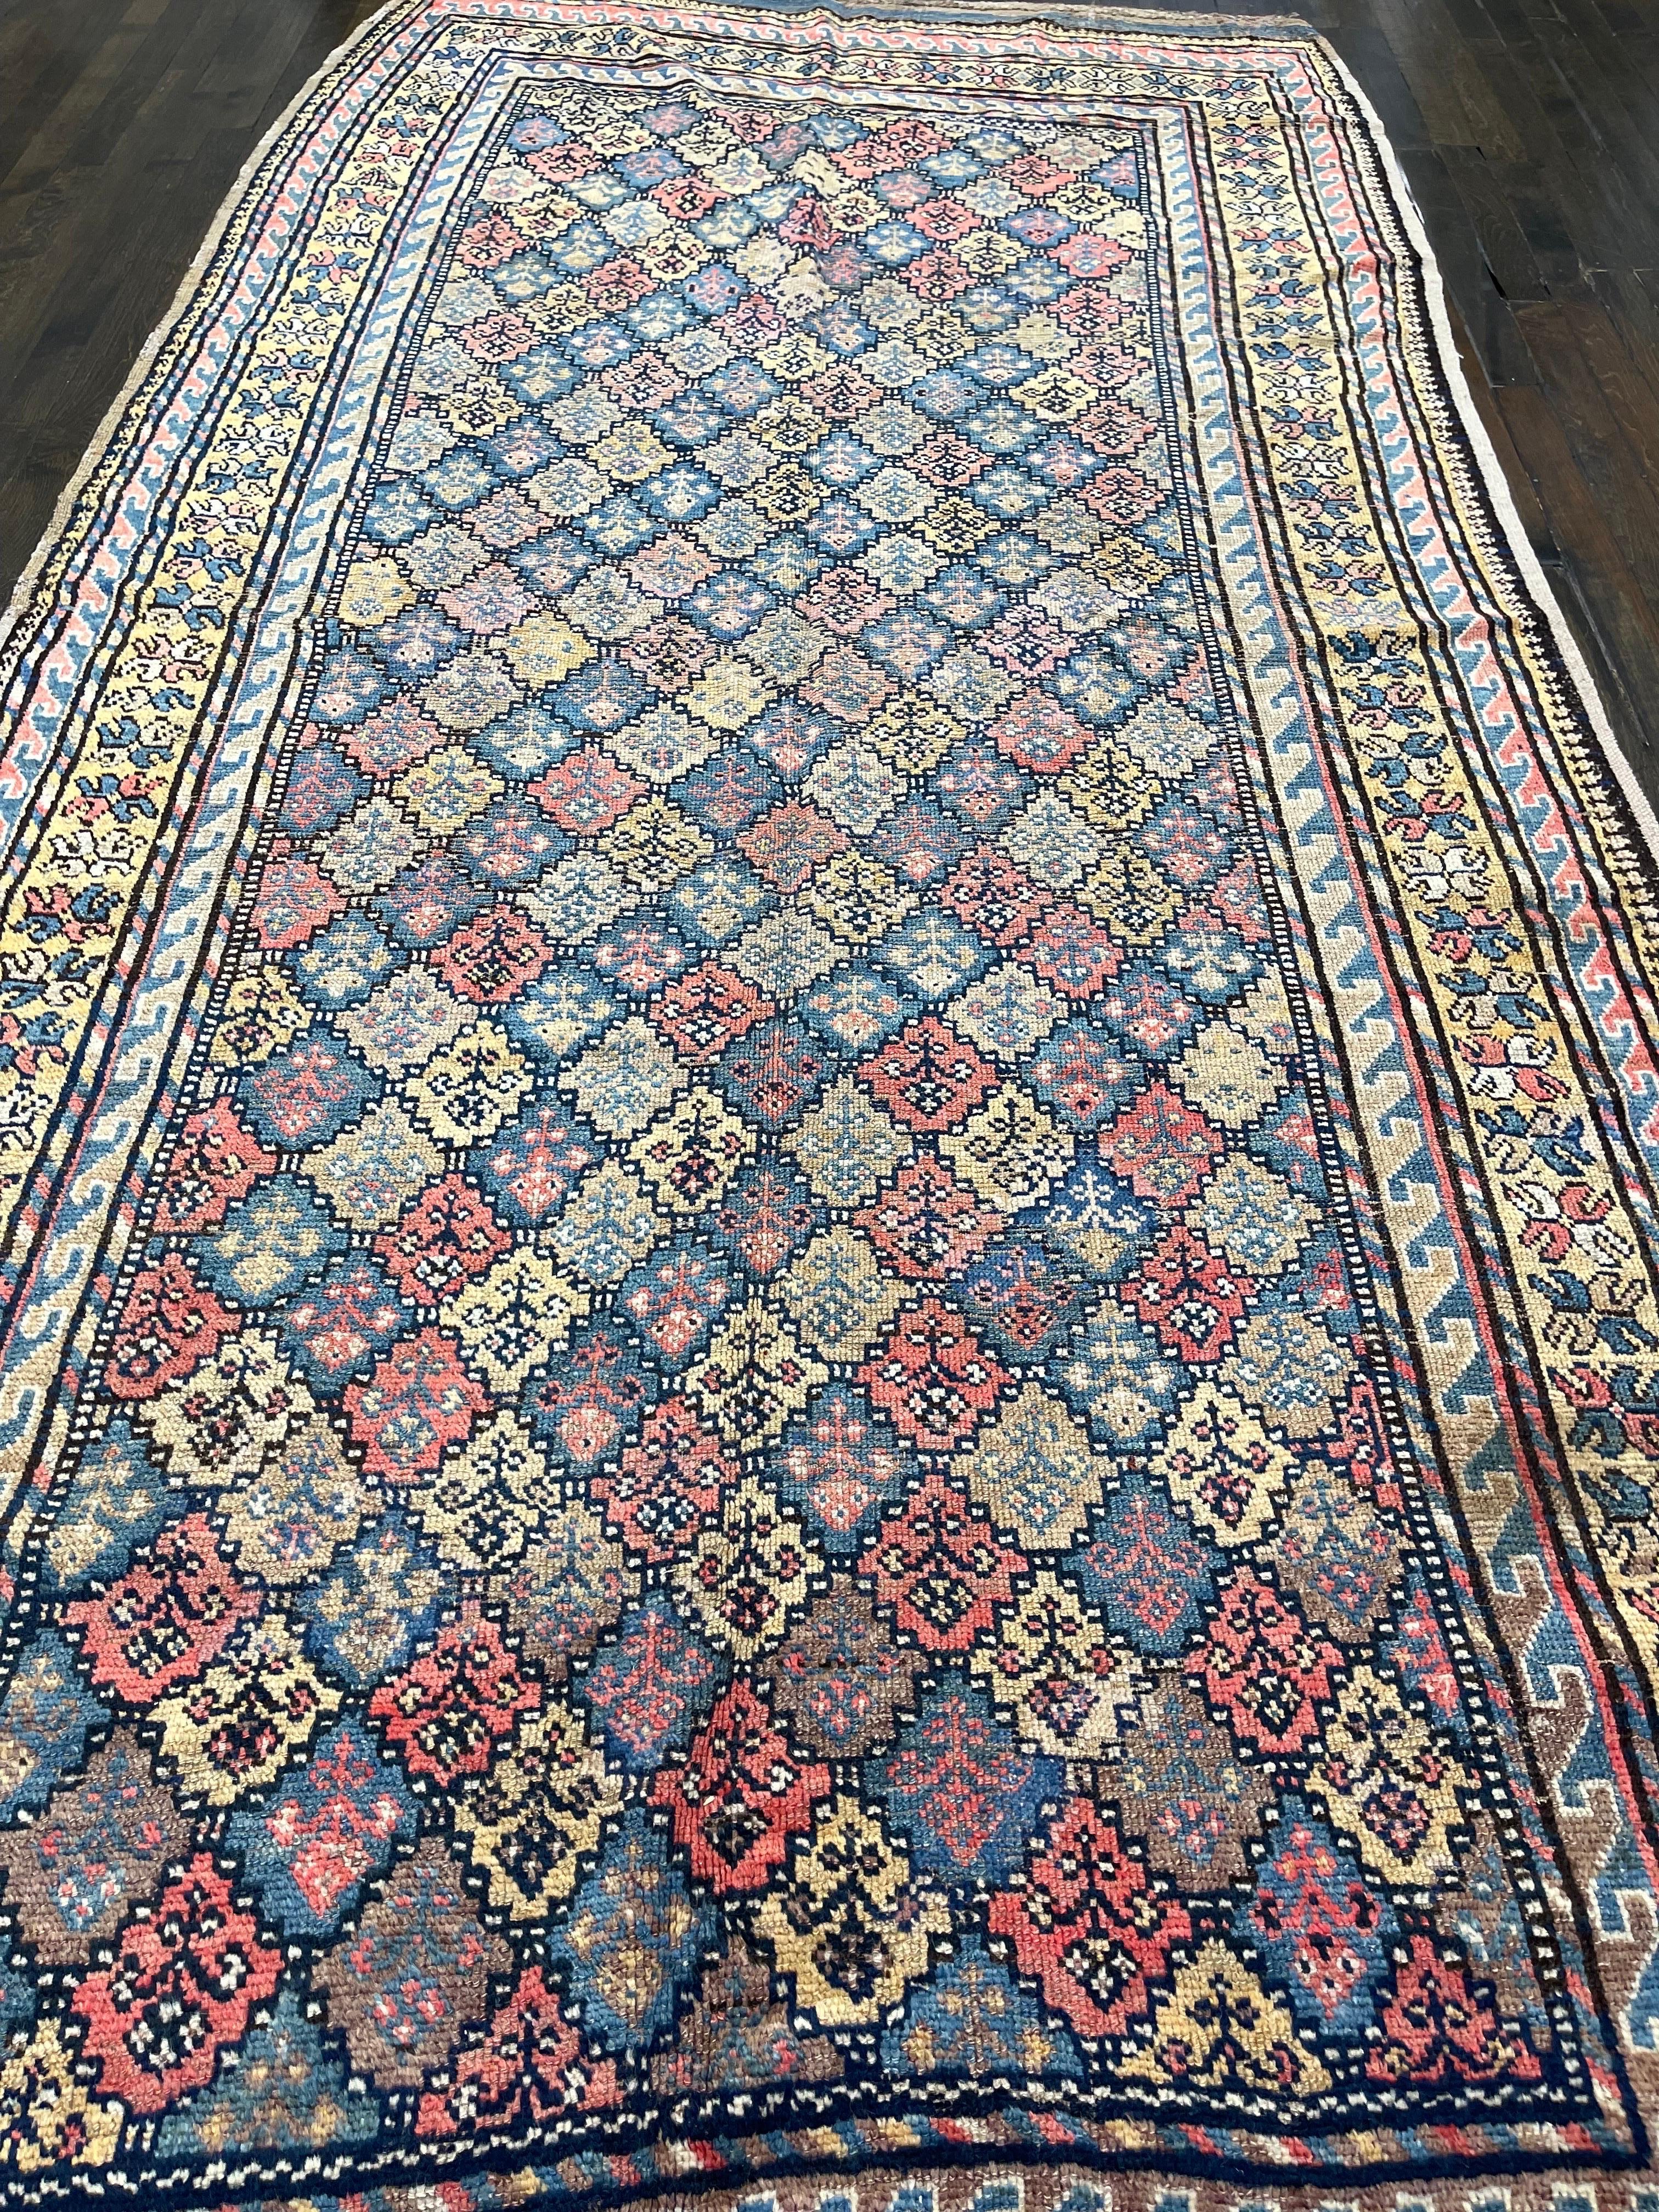 A well drowned Kurdish kazak corridor rug with brilliant colors of flowerheads that are highly abstract rosettes. 

The serrated outline of each ornament and colors in which each has been woven evoke petals, while the star filled diamond